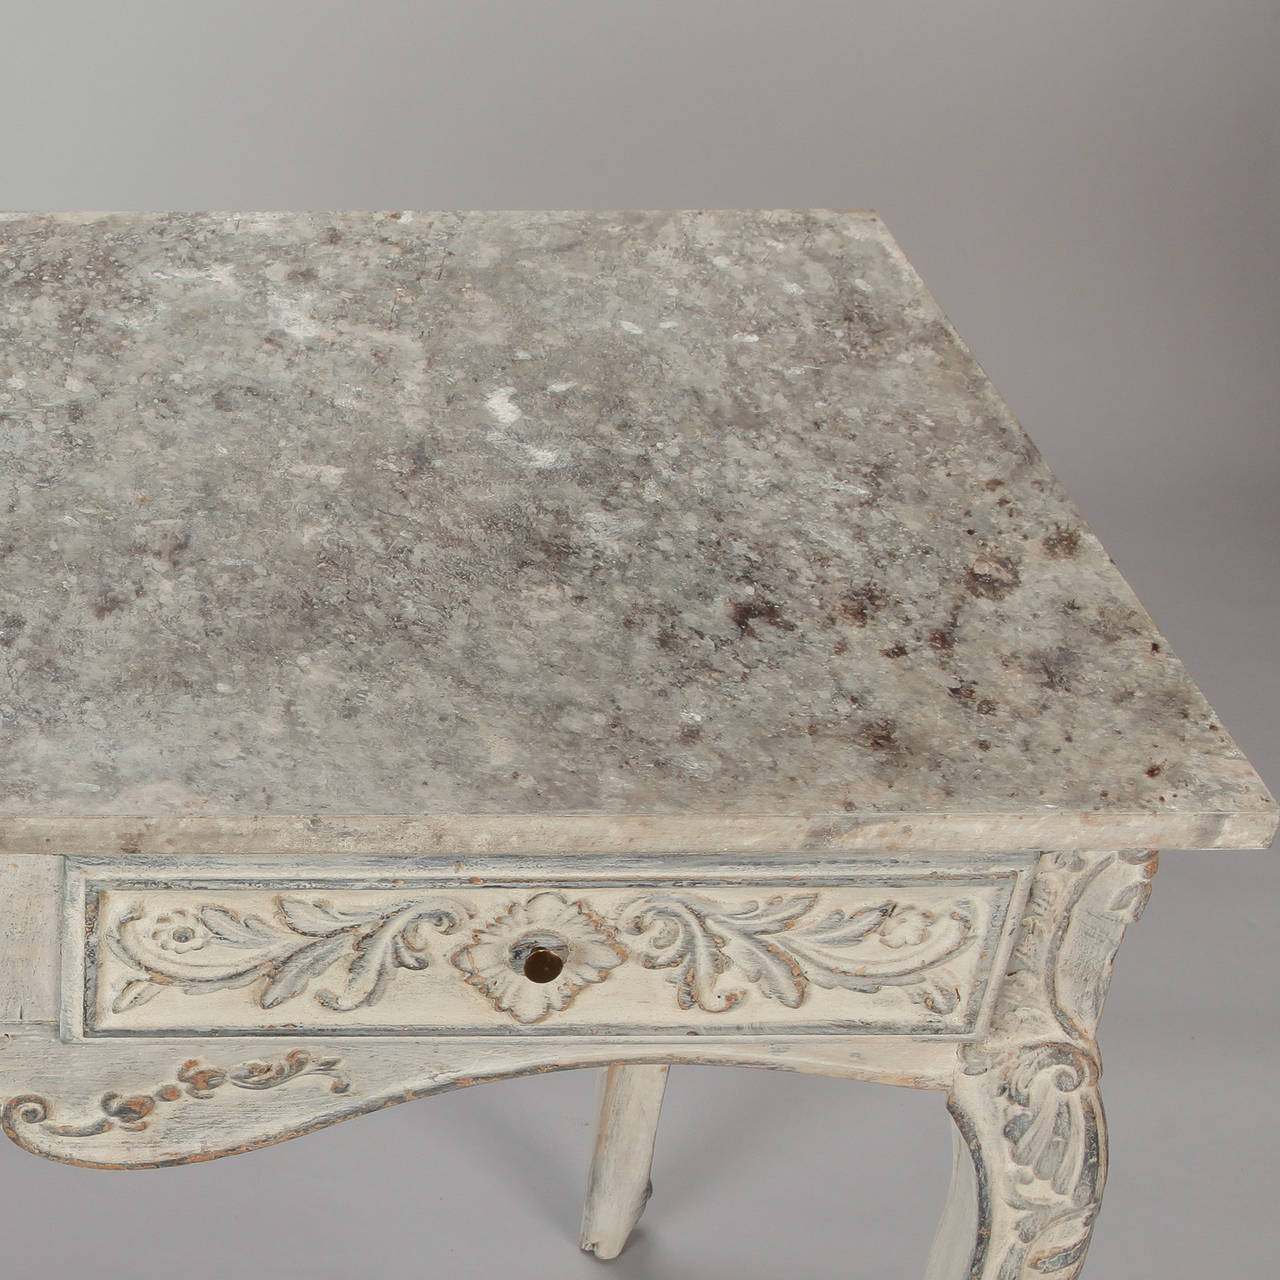 Painted French Table with Carved Leaves and Flowers 1